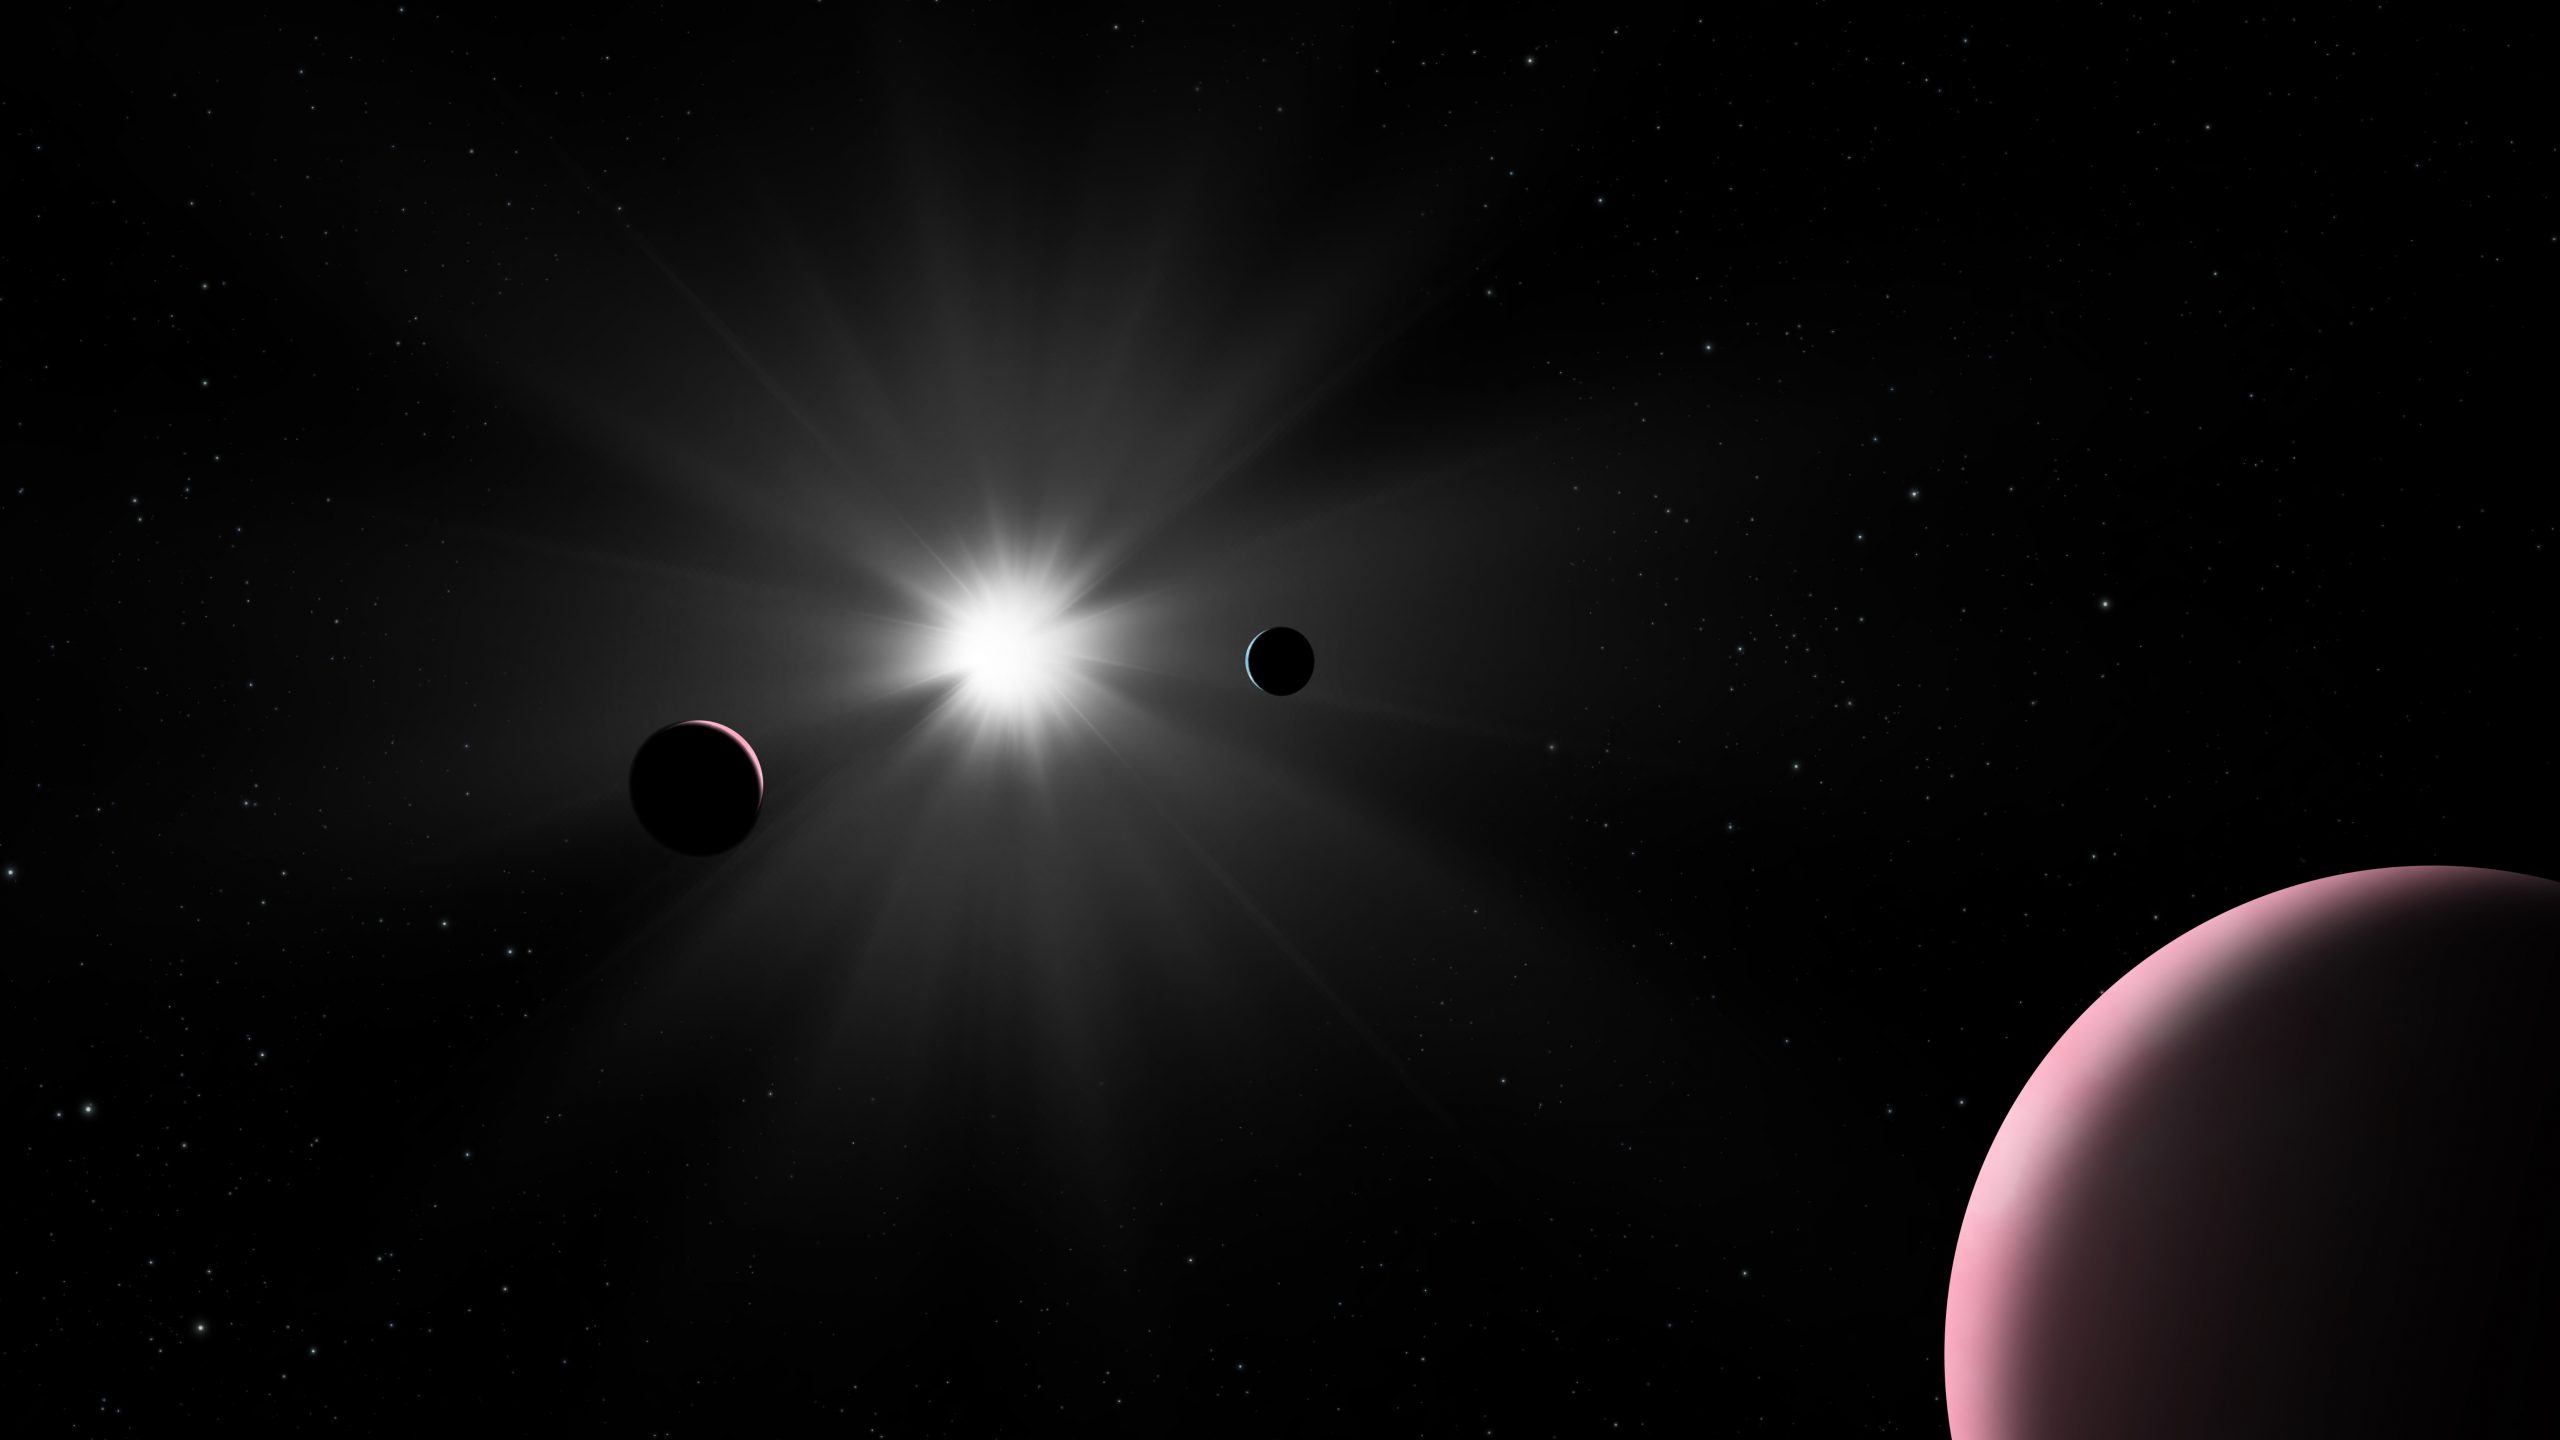 The European Space Telescope has discovered a planet unlike any other